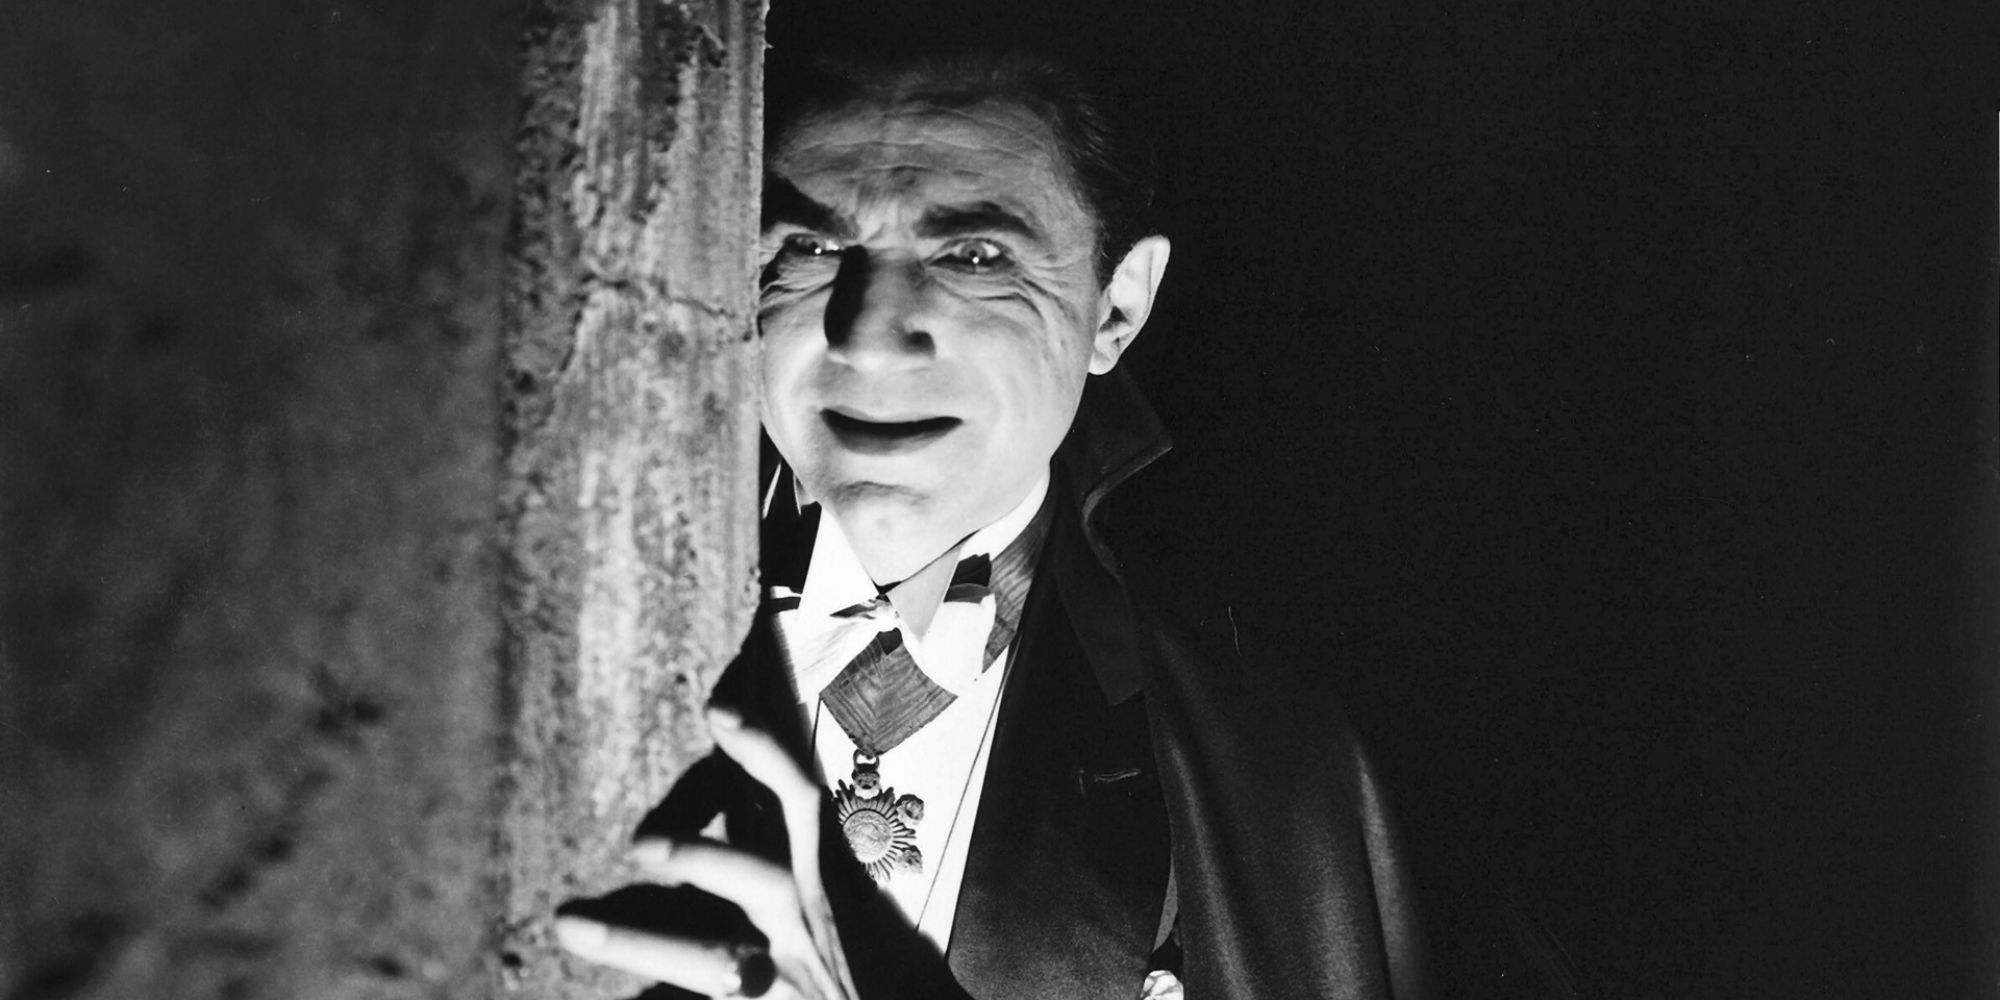 Count Dracula smiles menacingly from behind a shadowy corner